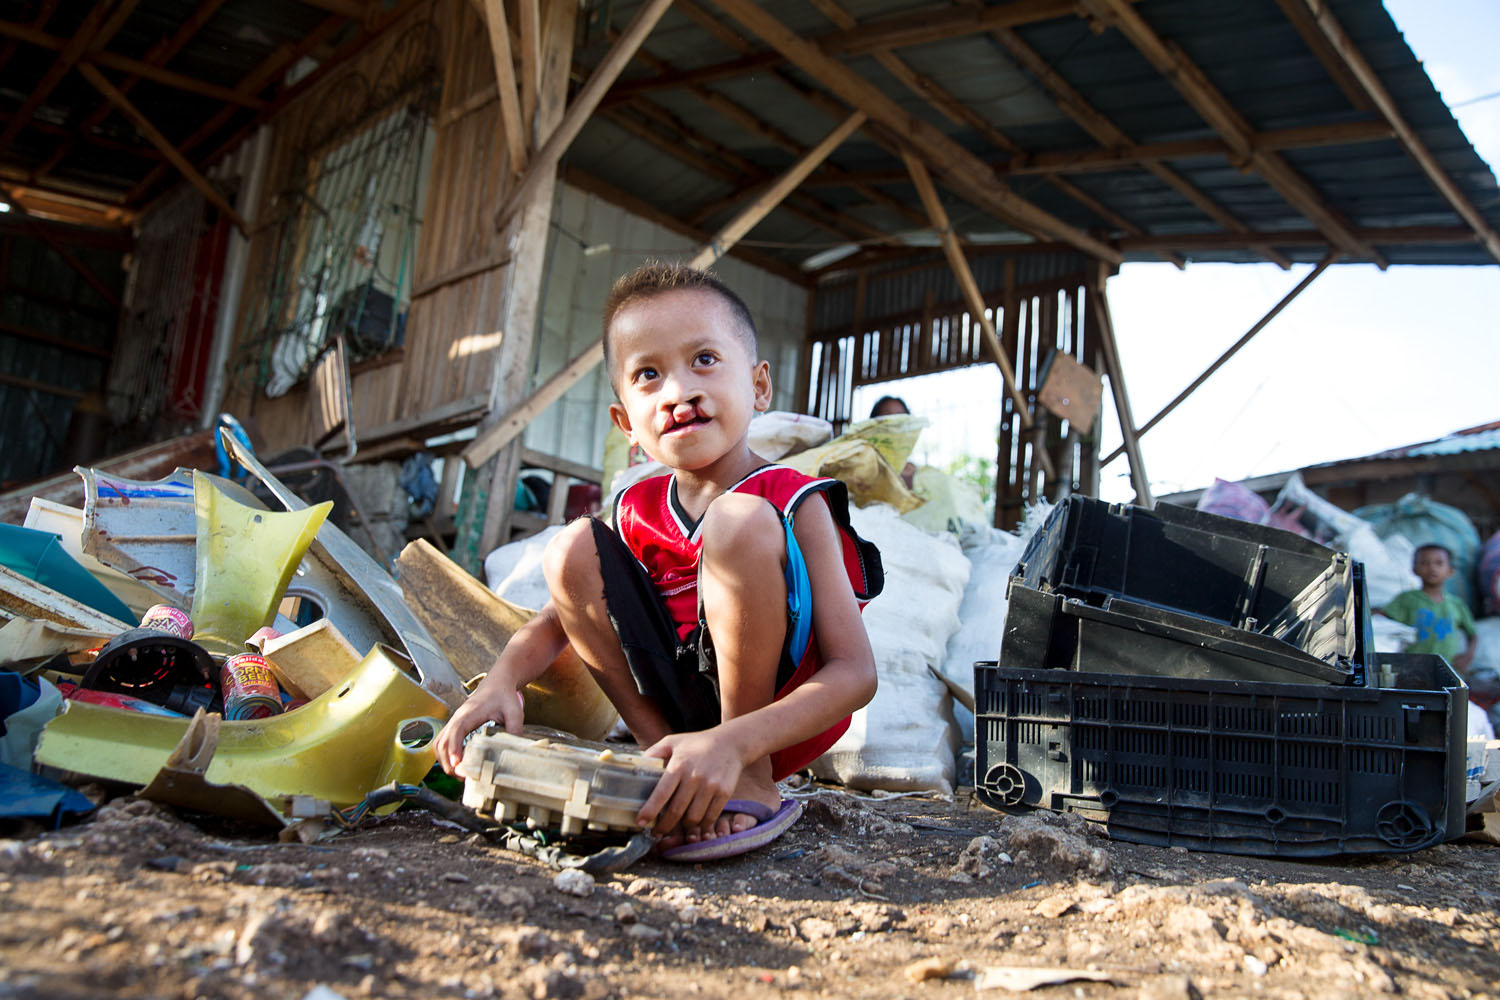 A young boy with a cleft condition squats in a rural setting near recycled scraps